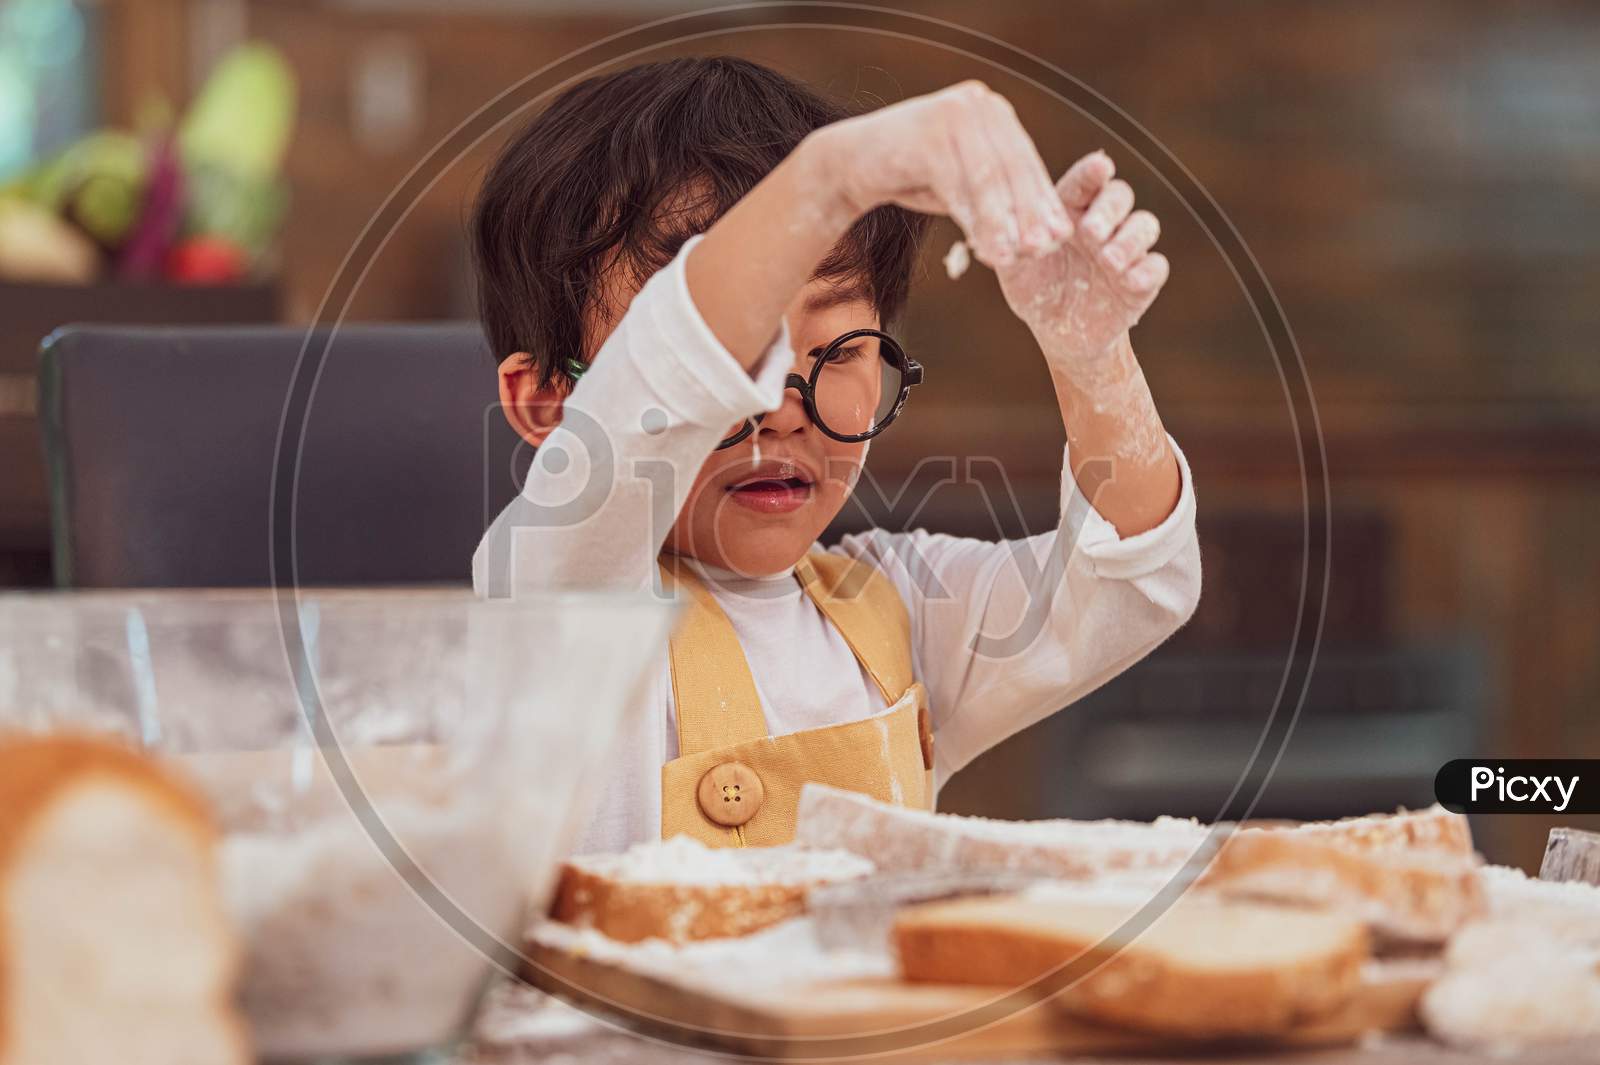 Portrait Cute Little Asian Happiness Boy Interested In Baking Bakery With Funny In Home Kitchen. People Lifestyles And Family. Homemade Food And Ingredients Concept. Baking Christmas Cake And Cookies